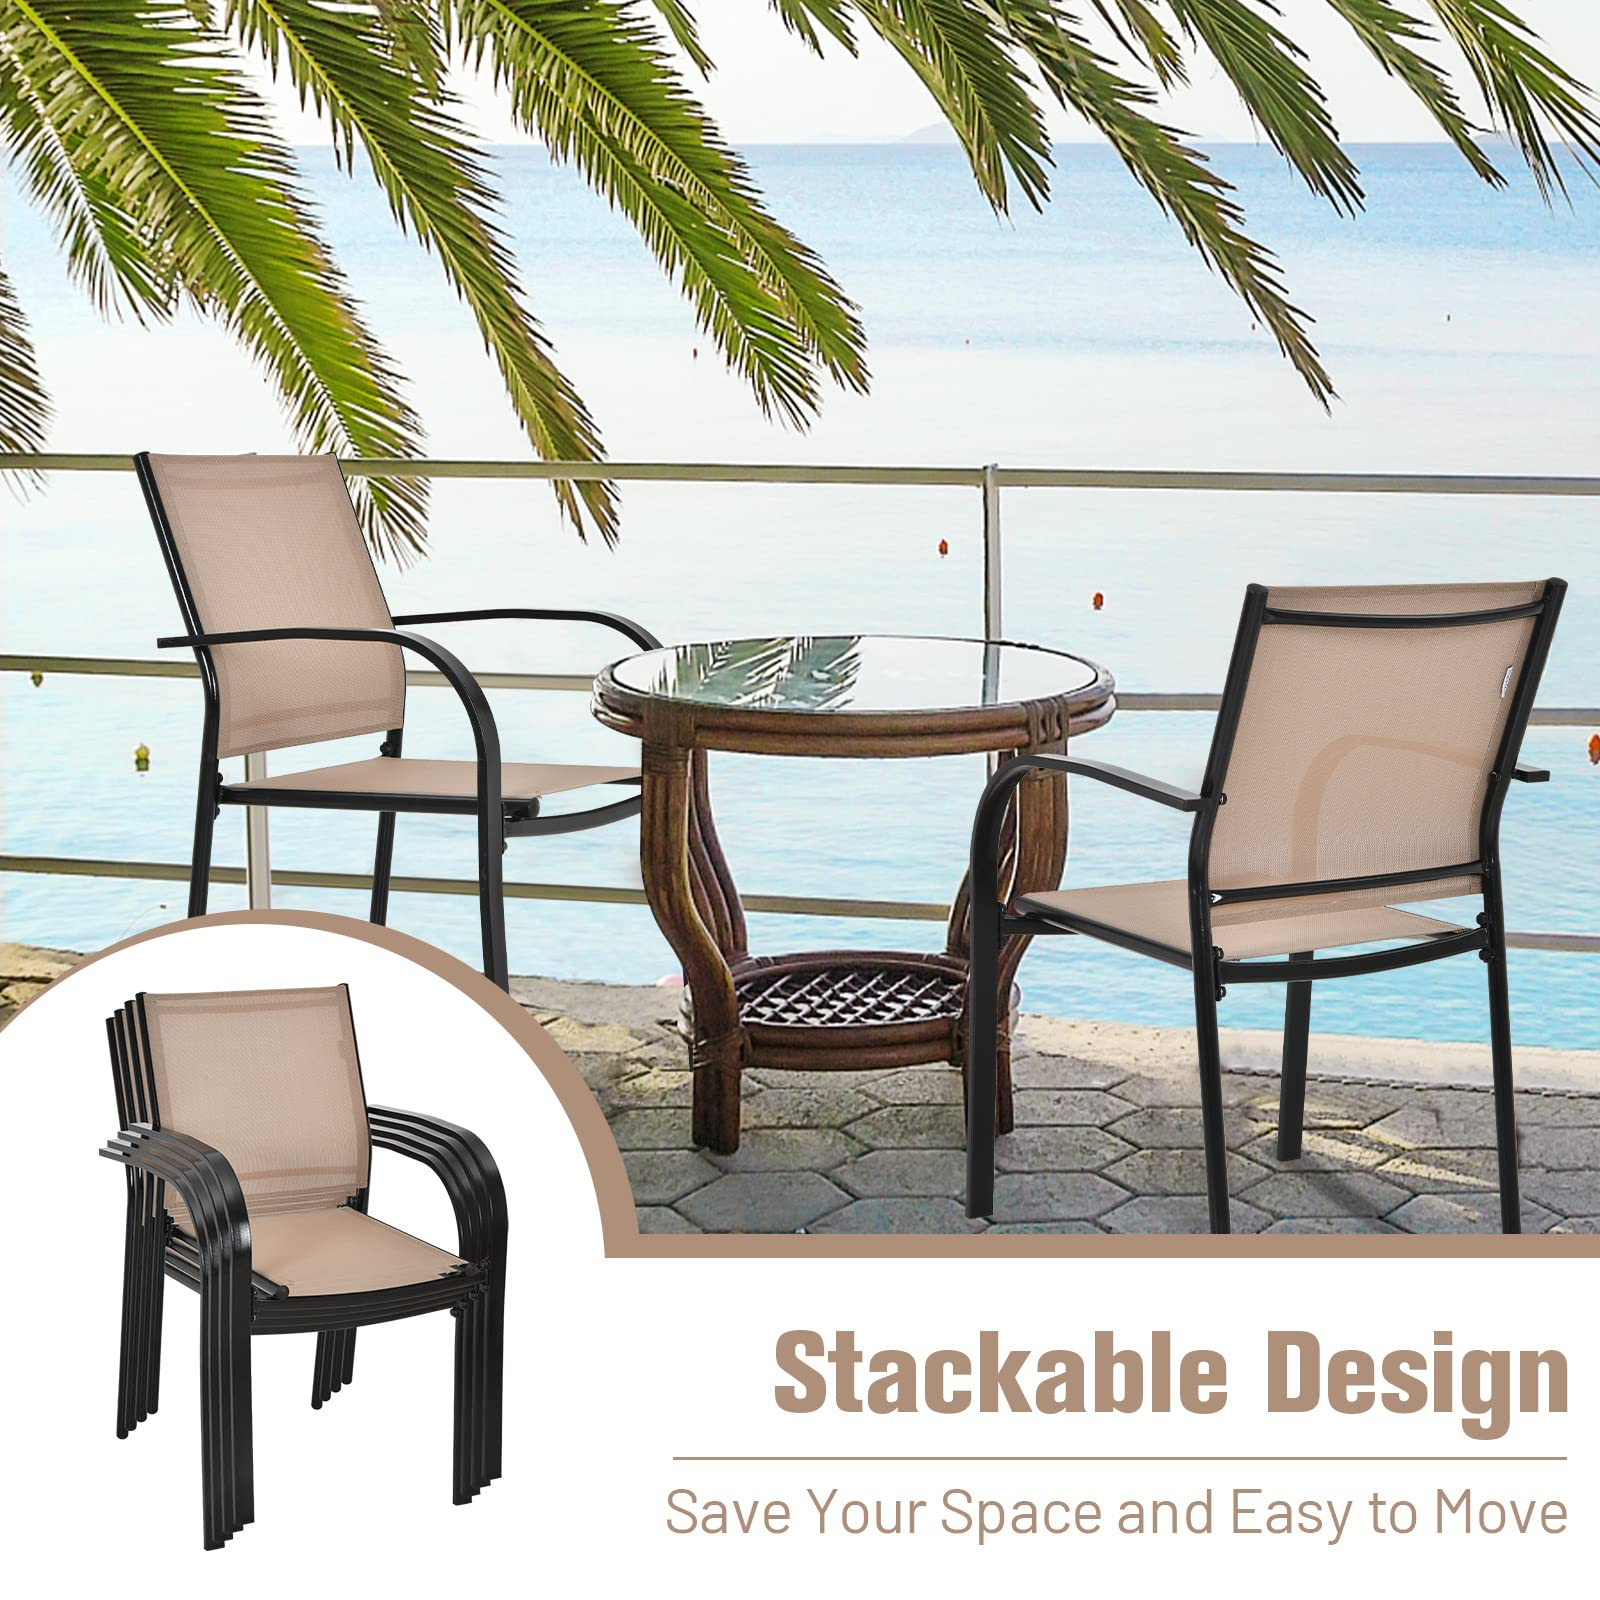 Tangkula Set of 2 Patio Dining Chairs, Outdoor Stackable Chairs with Armrests